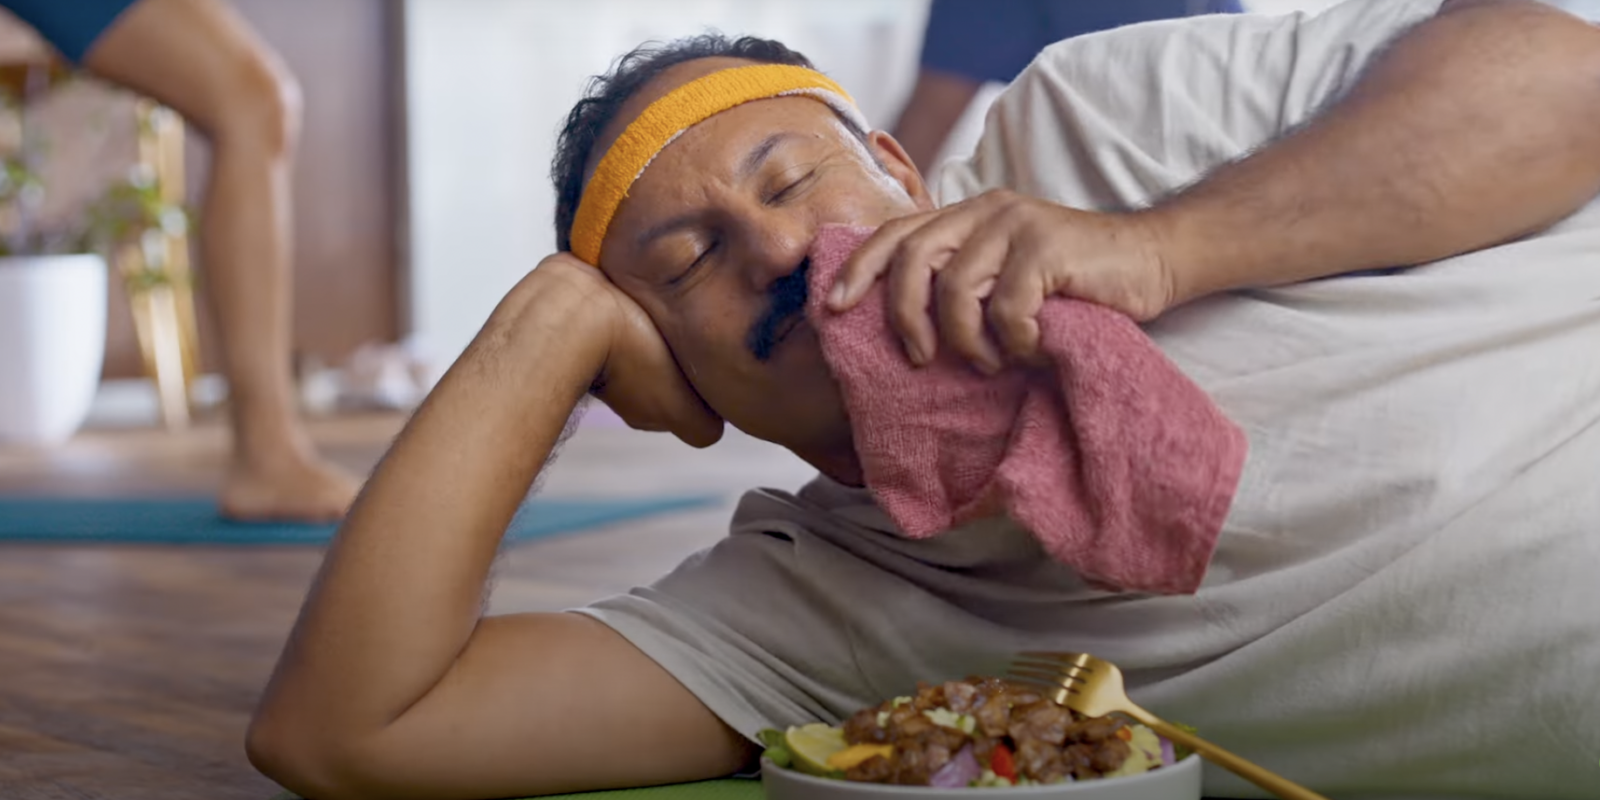 A man wearing a sweat headband dabs his mouth with a napkin while lying on his side eating a bowl of Beyond Steak.